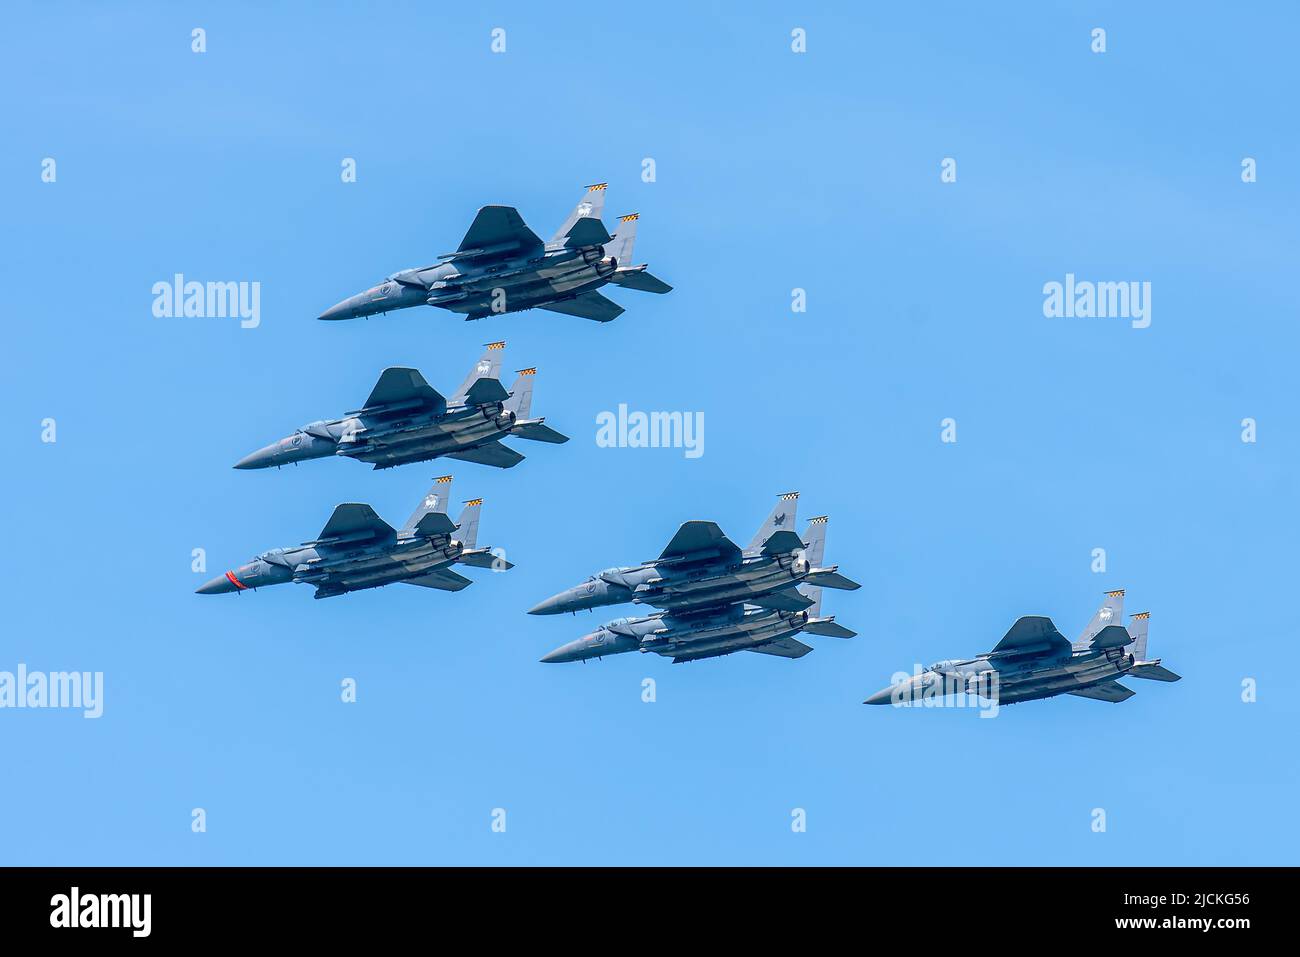 singapore, Singapore -  Aug 11, 2018: he F-15SG is an all-weather multi-role fighter. Equipped with the latest technological upgrades, it is one of th Stock Photo